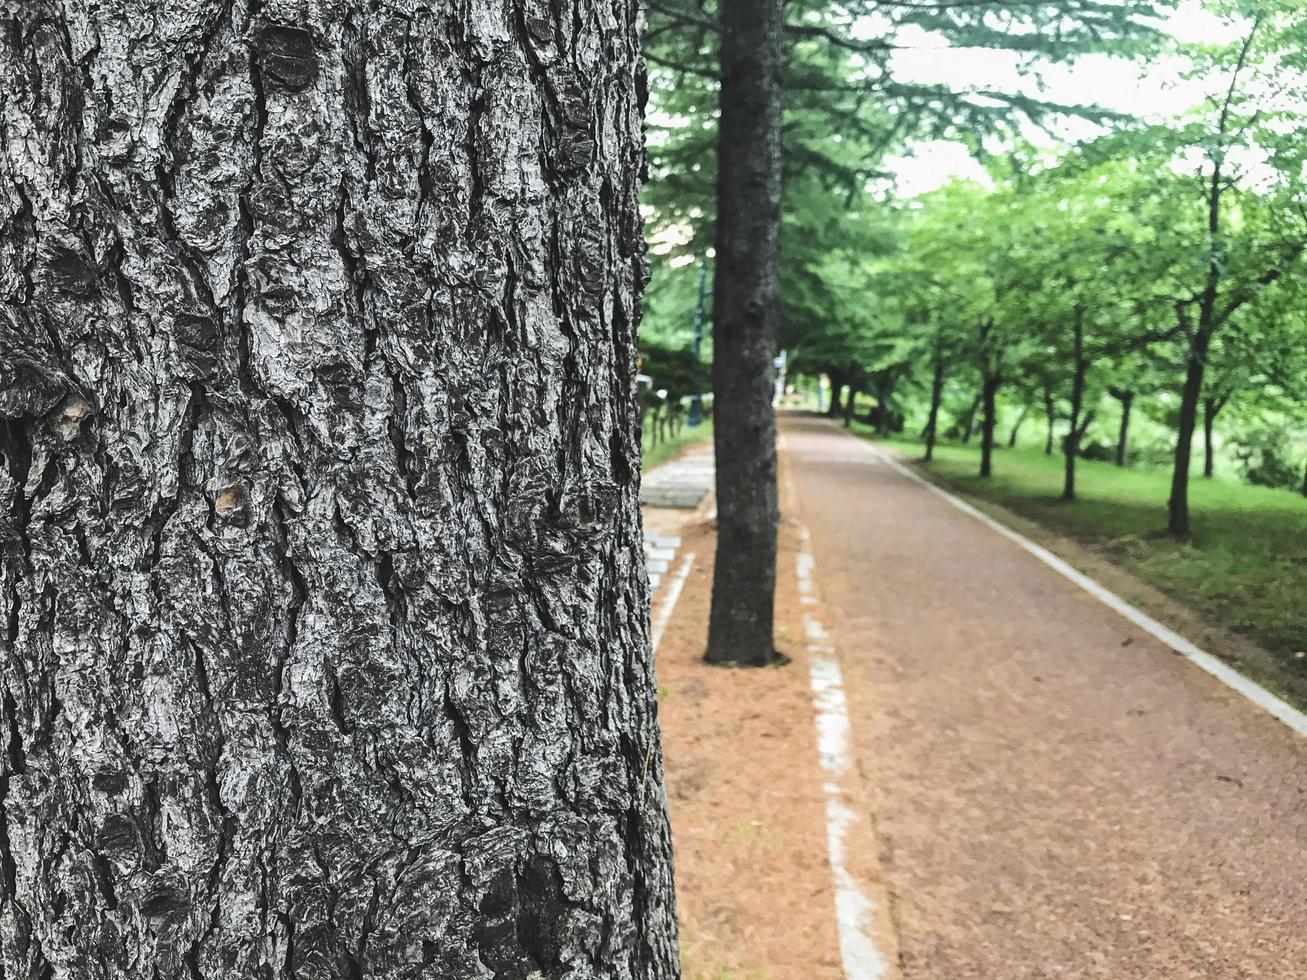 Big tree and a walking path in a park, South Korea photo